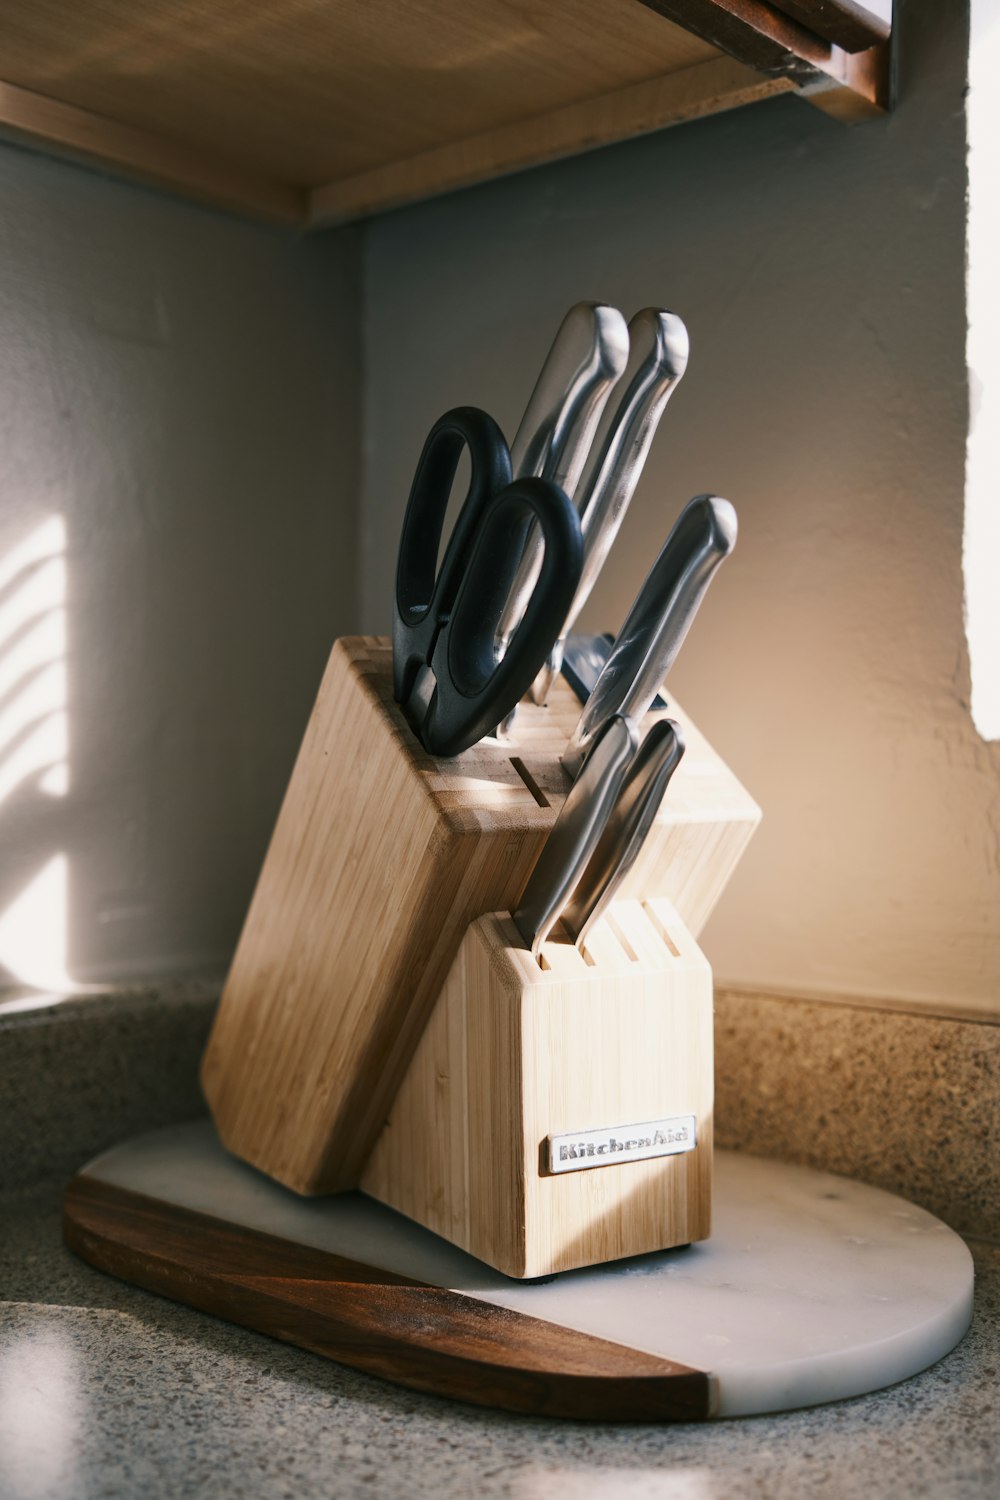 a wooden block with a knife holder holding knives